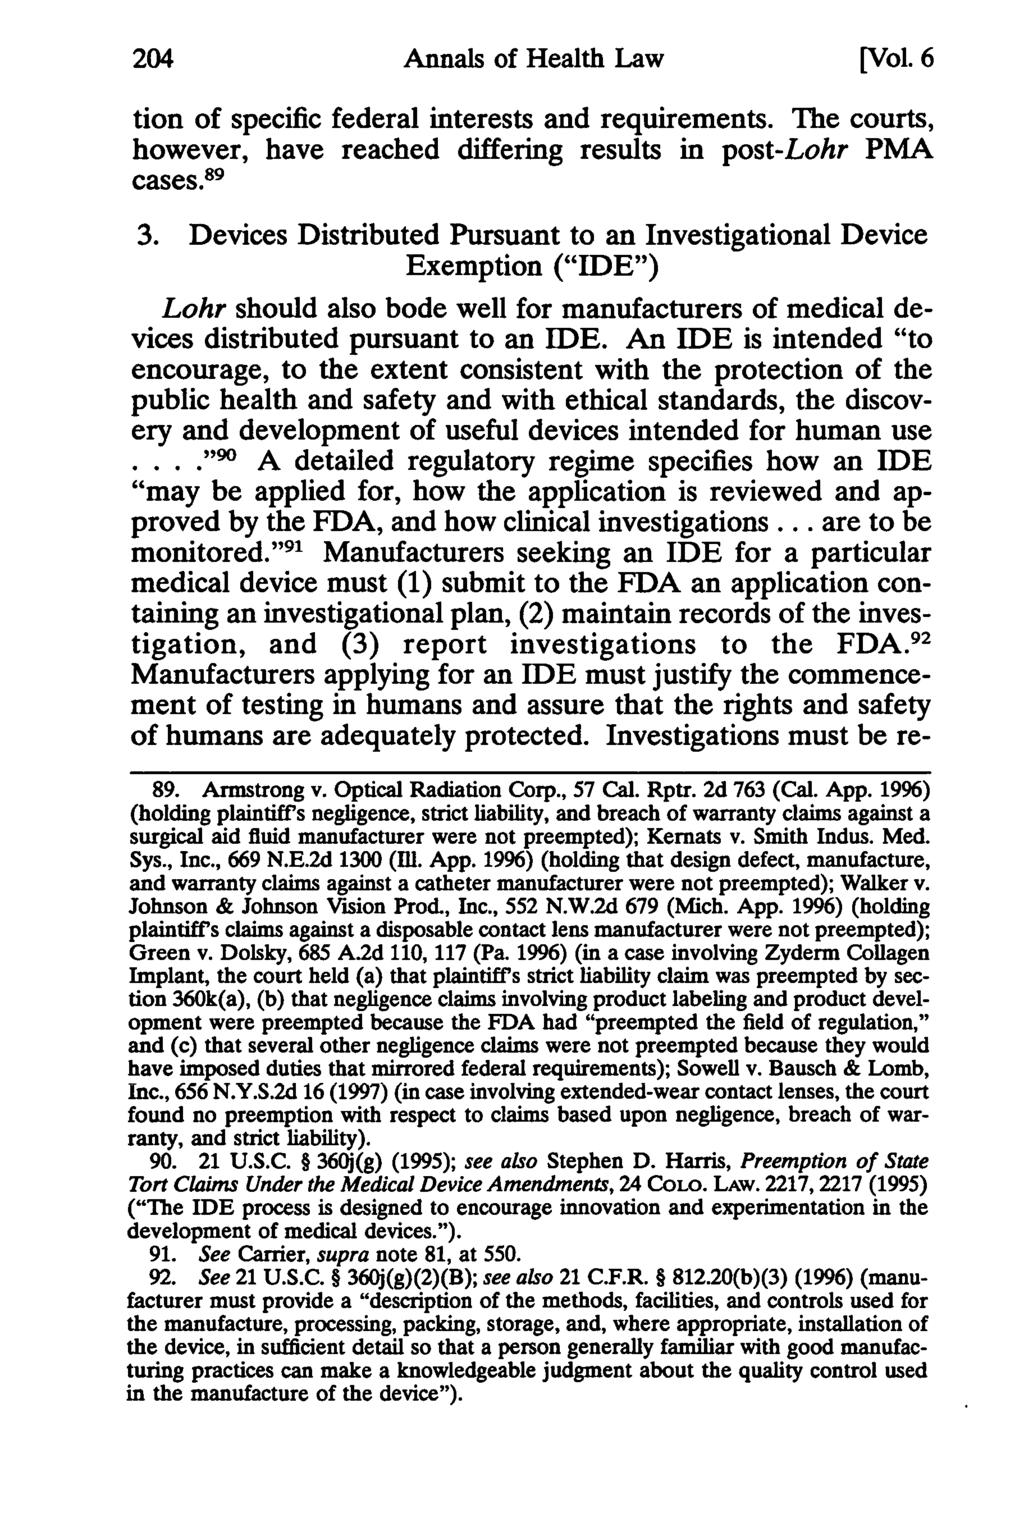 204 Annals of Health Annals Law, Vol. of 6 Health [1997], Iss. Law 1, Art. 10 [Vol. 6 tion of specific federal interests and requirements.